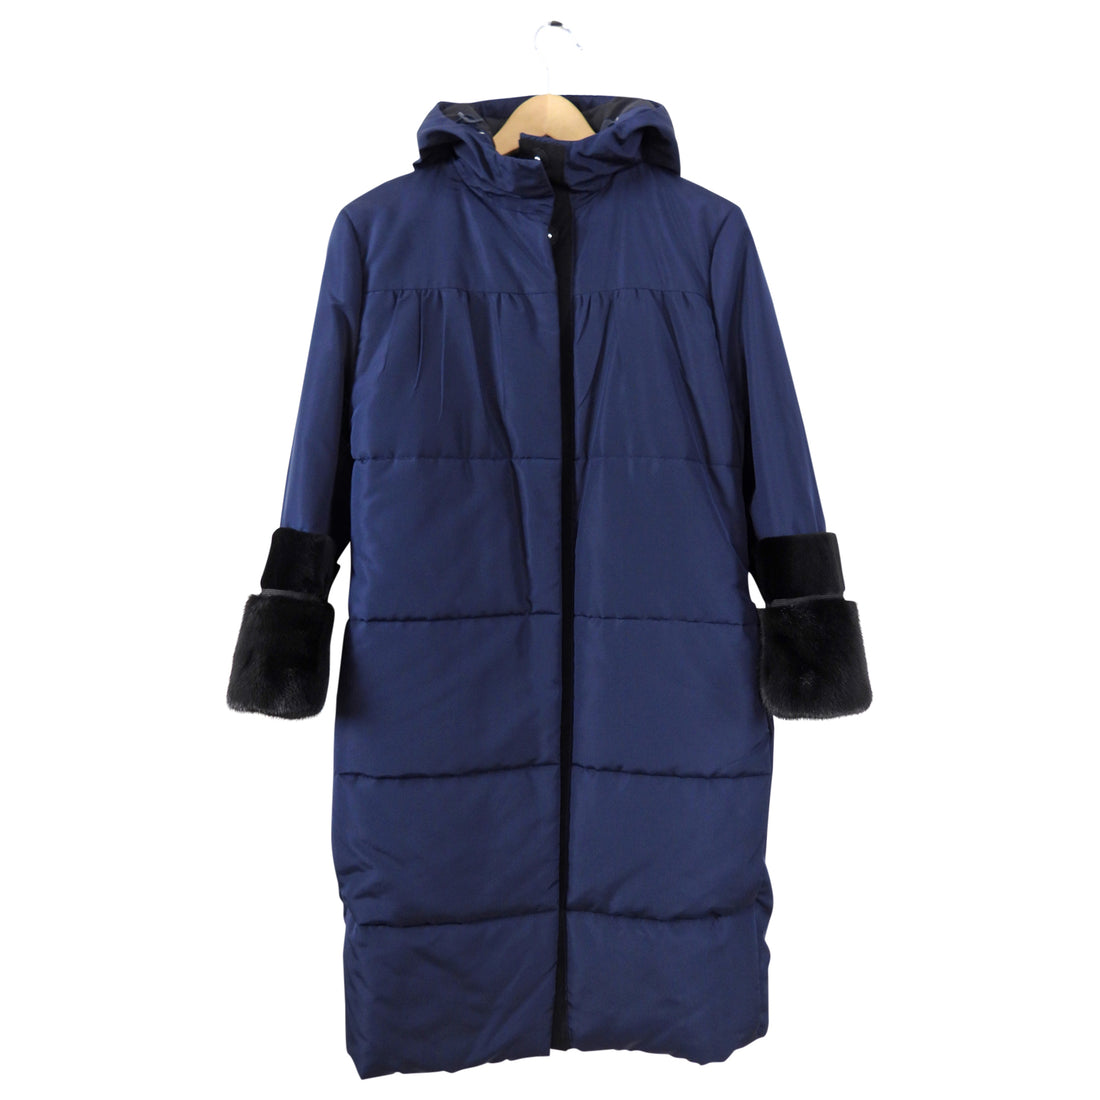 Prada Navy Hooded Puffer Coat with Mink and Sheared Fur Trim - IT38 / XS / S